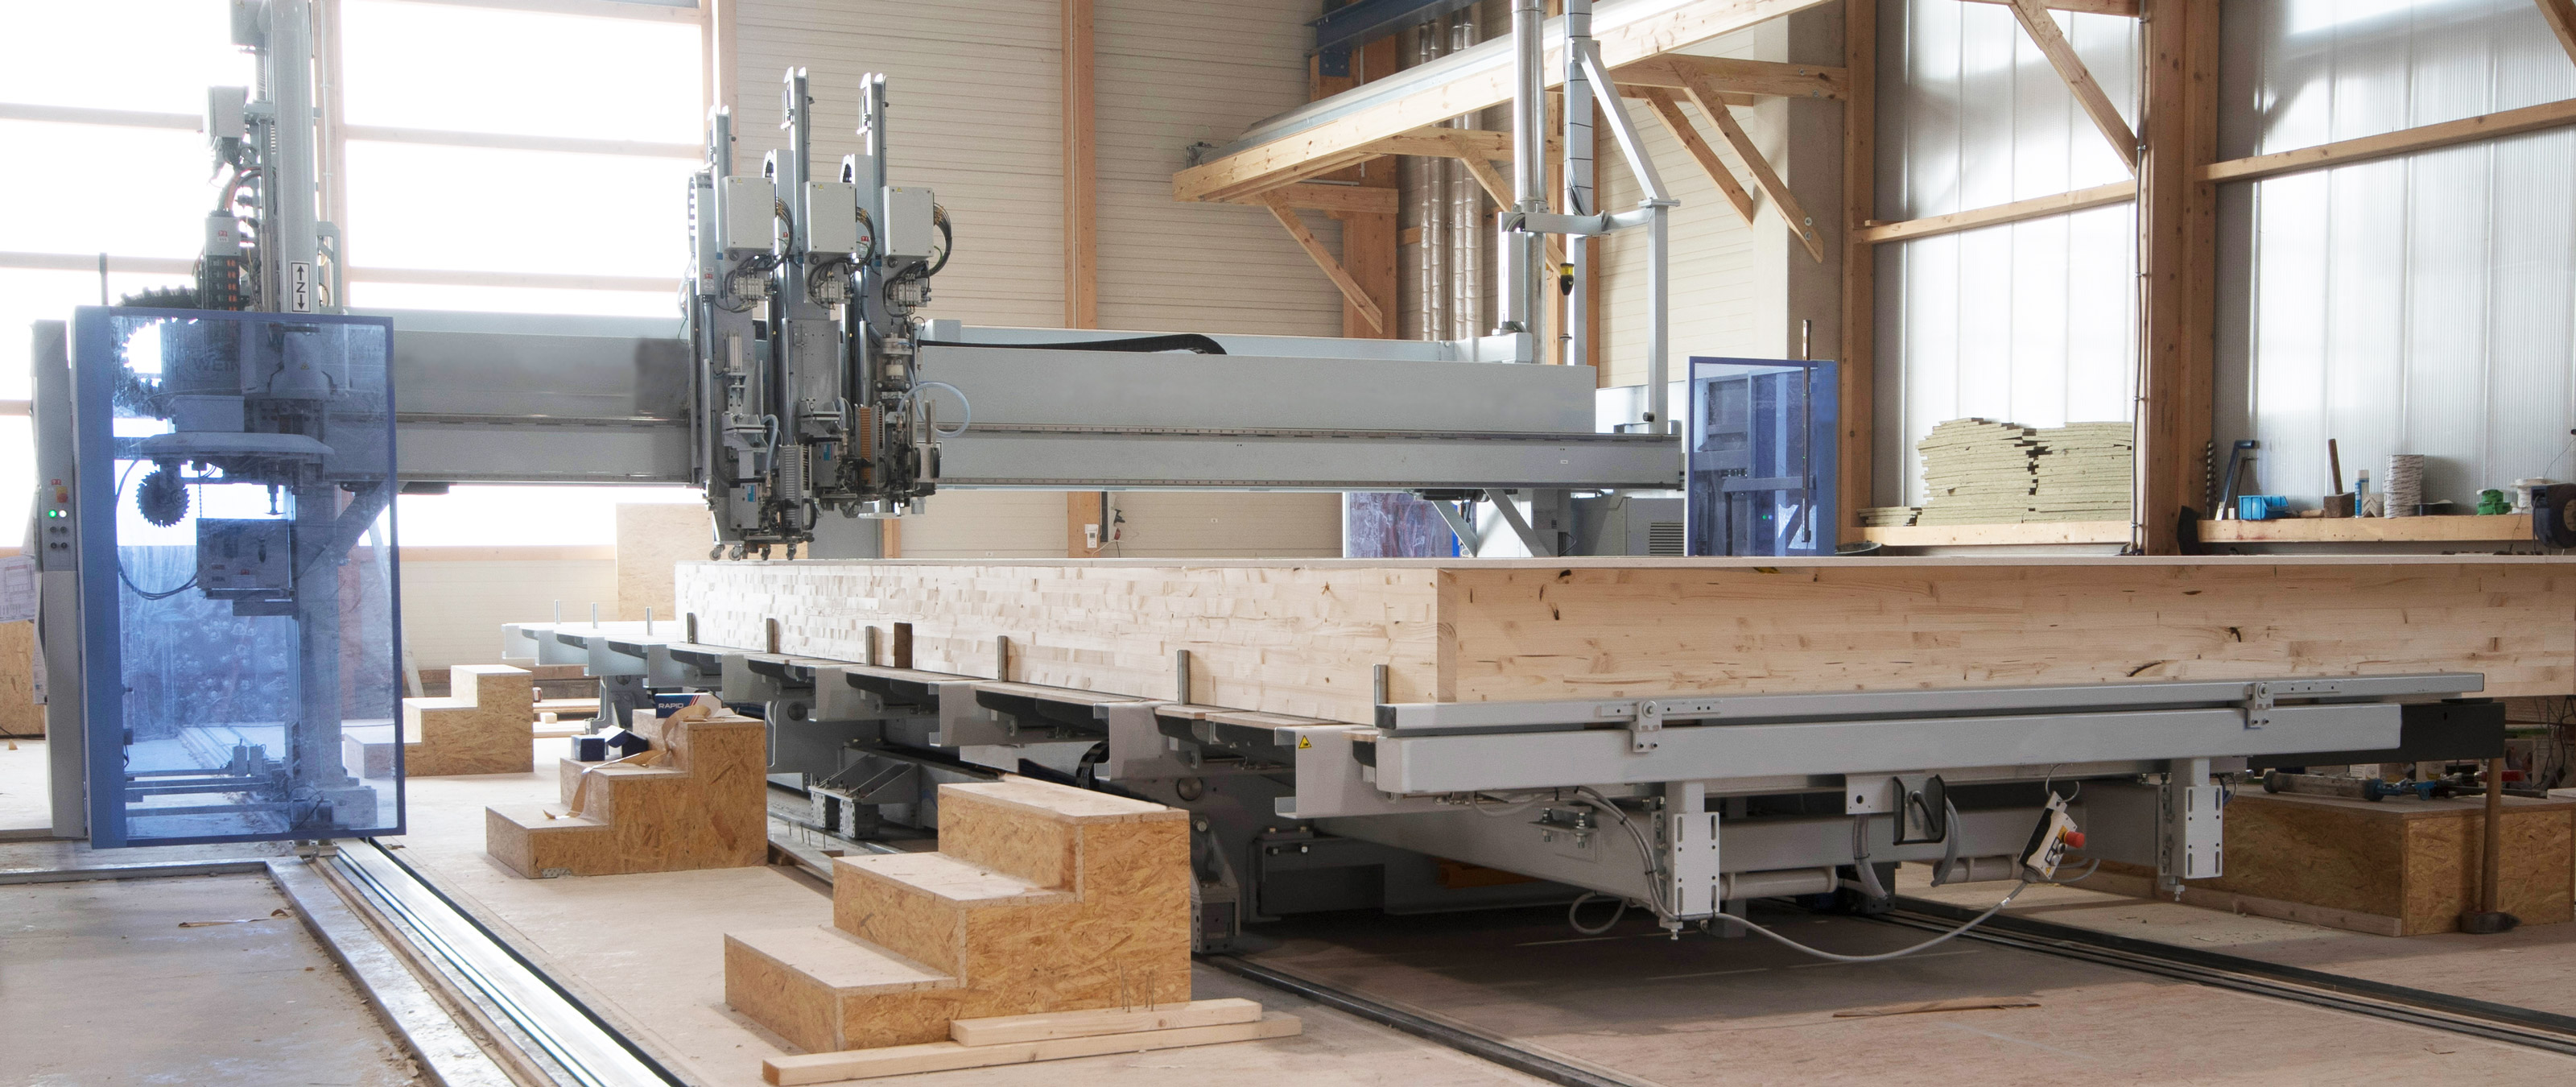 The compact system at the timber construction company consists of a multifunction bridge and a carpentry table.